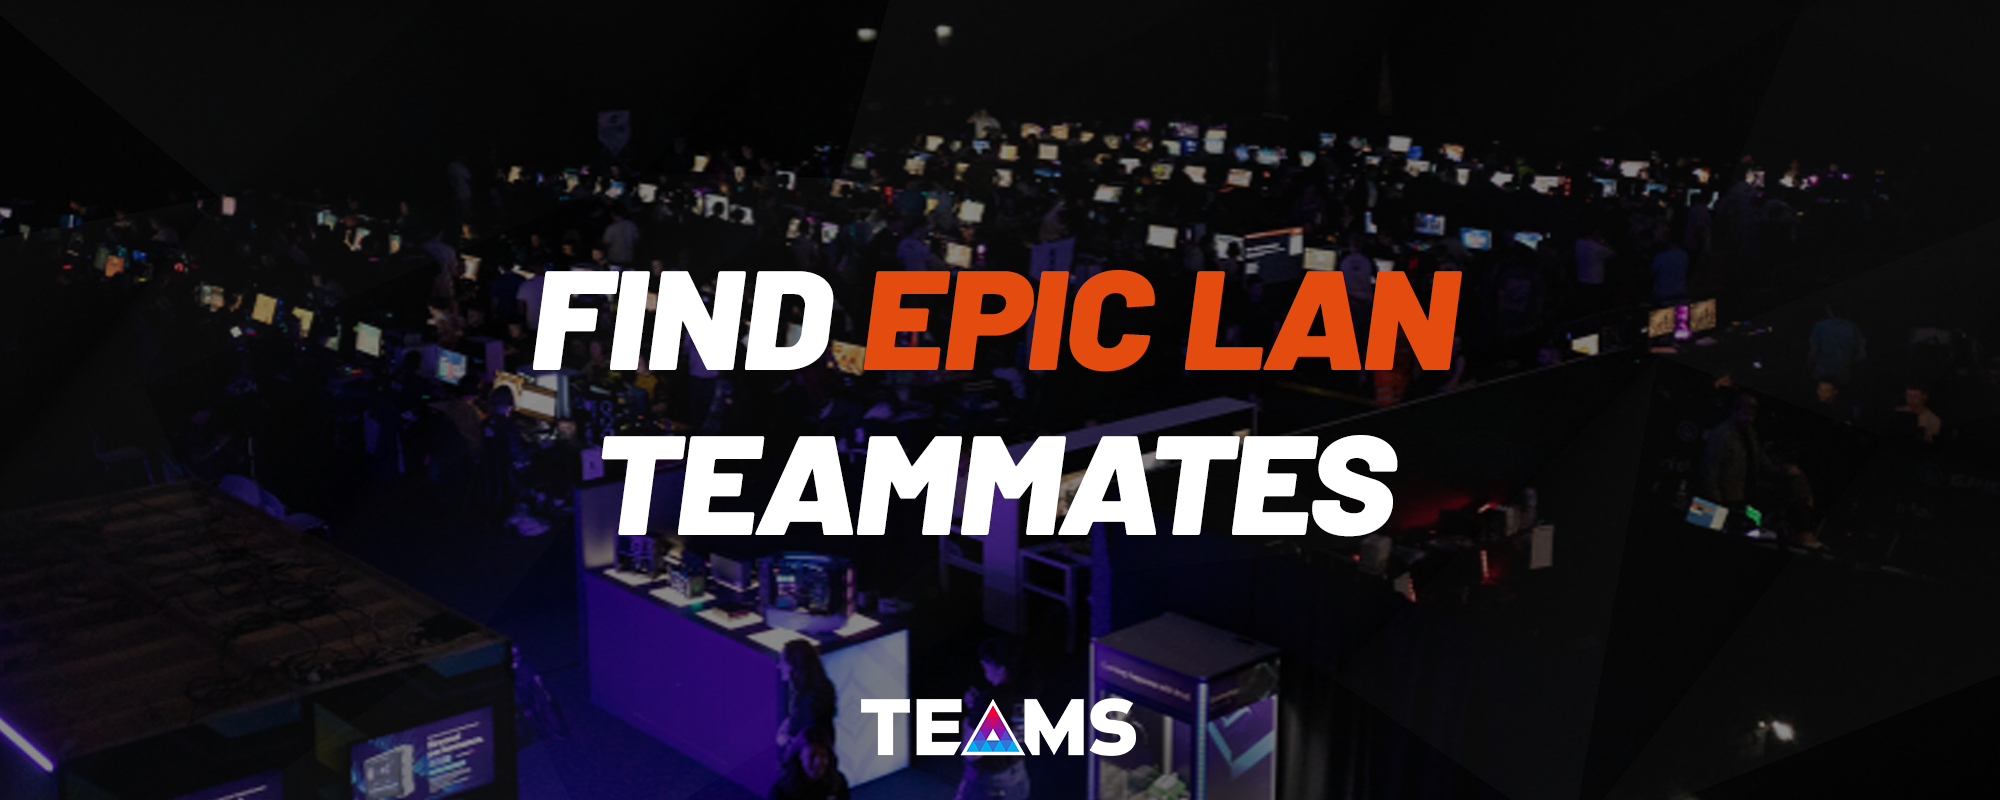 Looking for an EPIC LAN Team or need teammates?